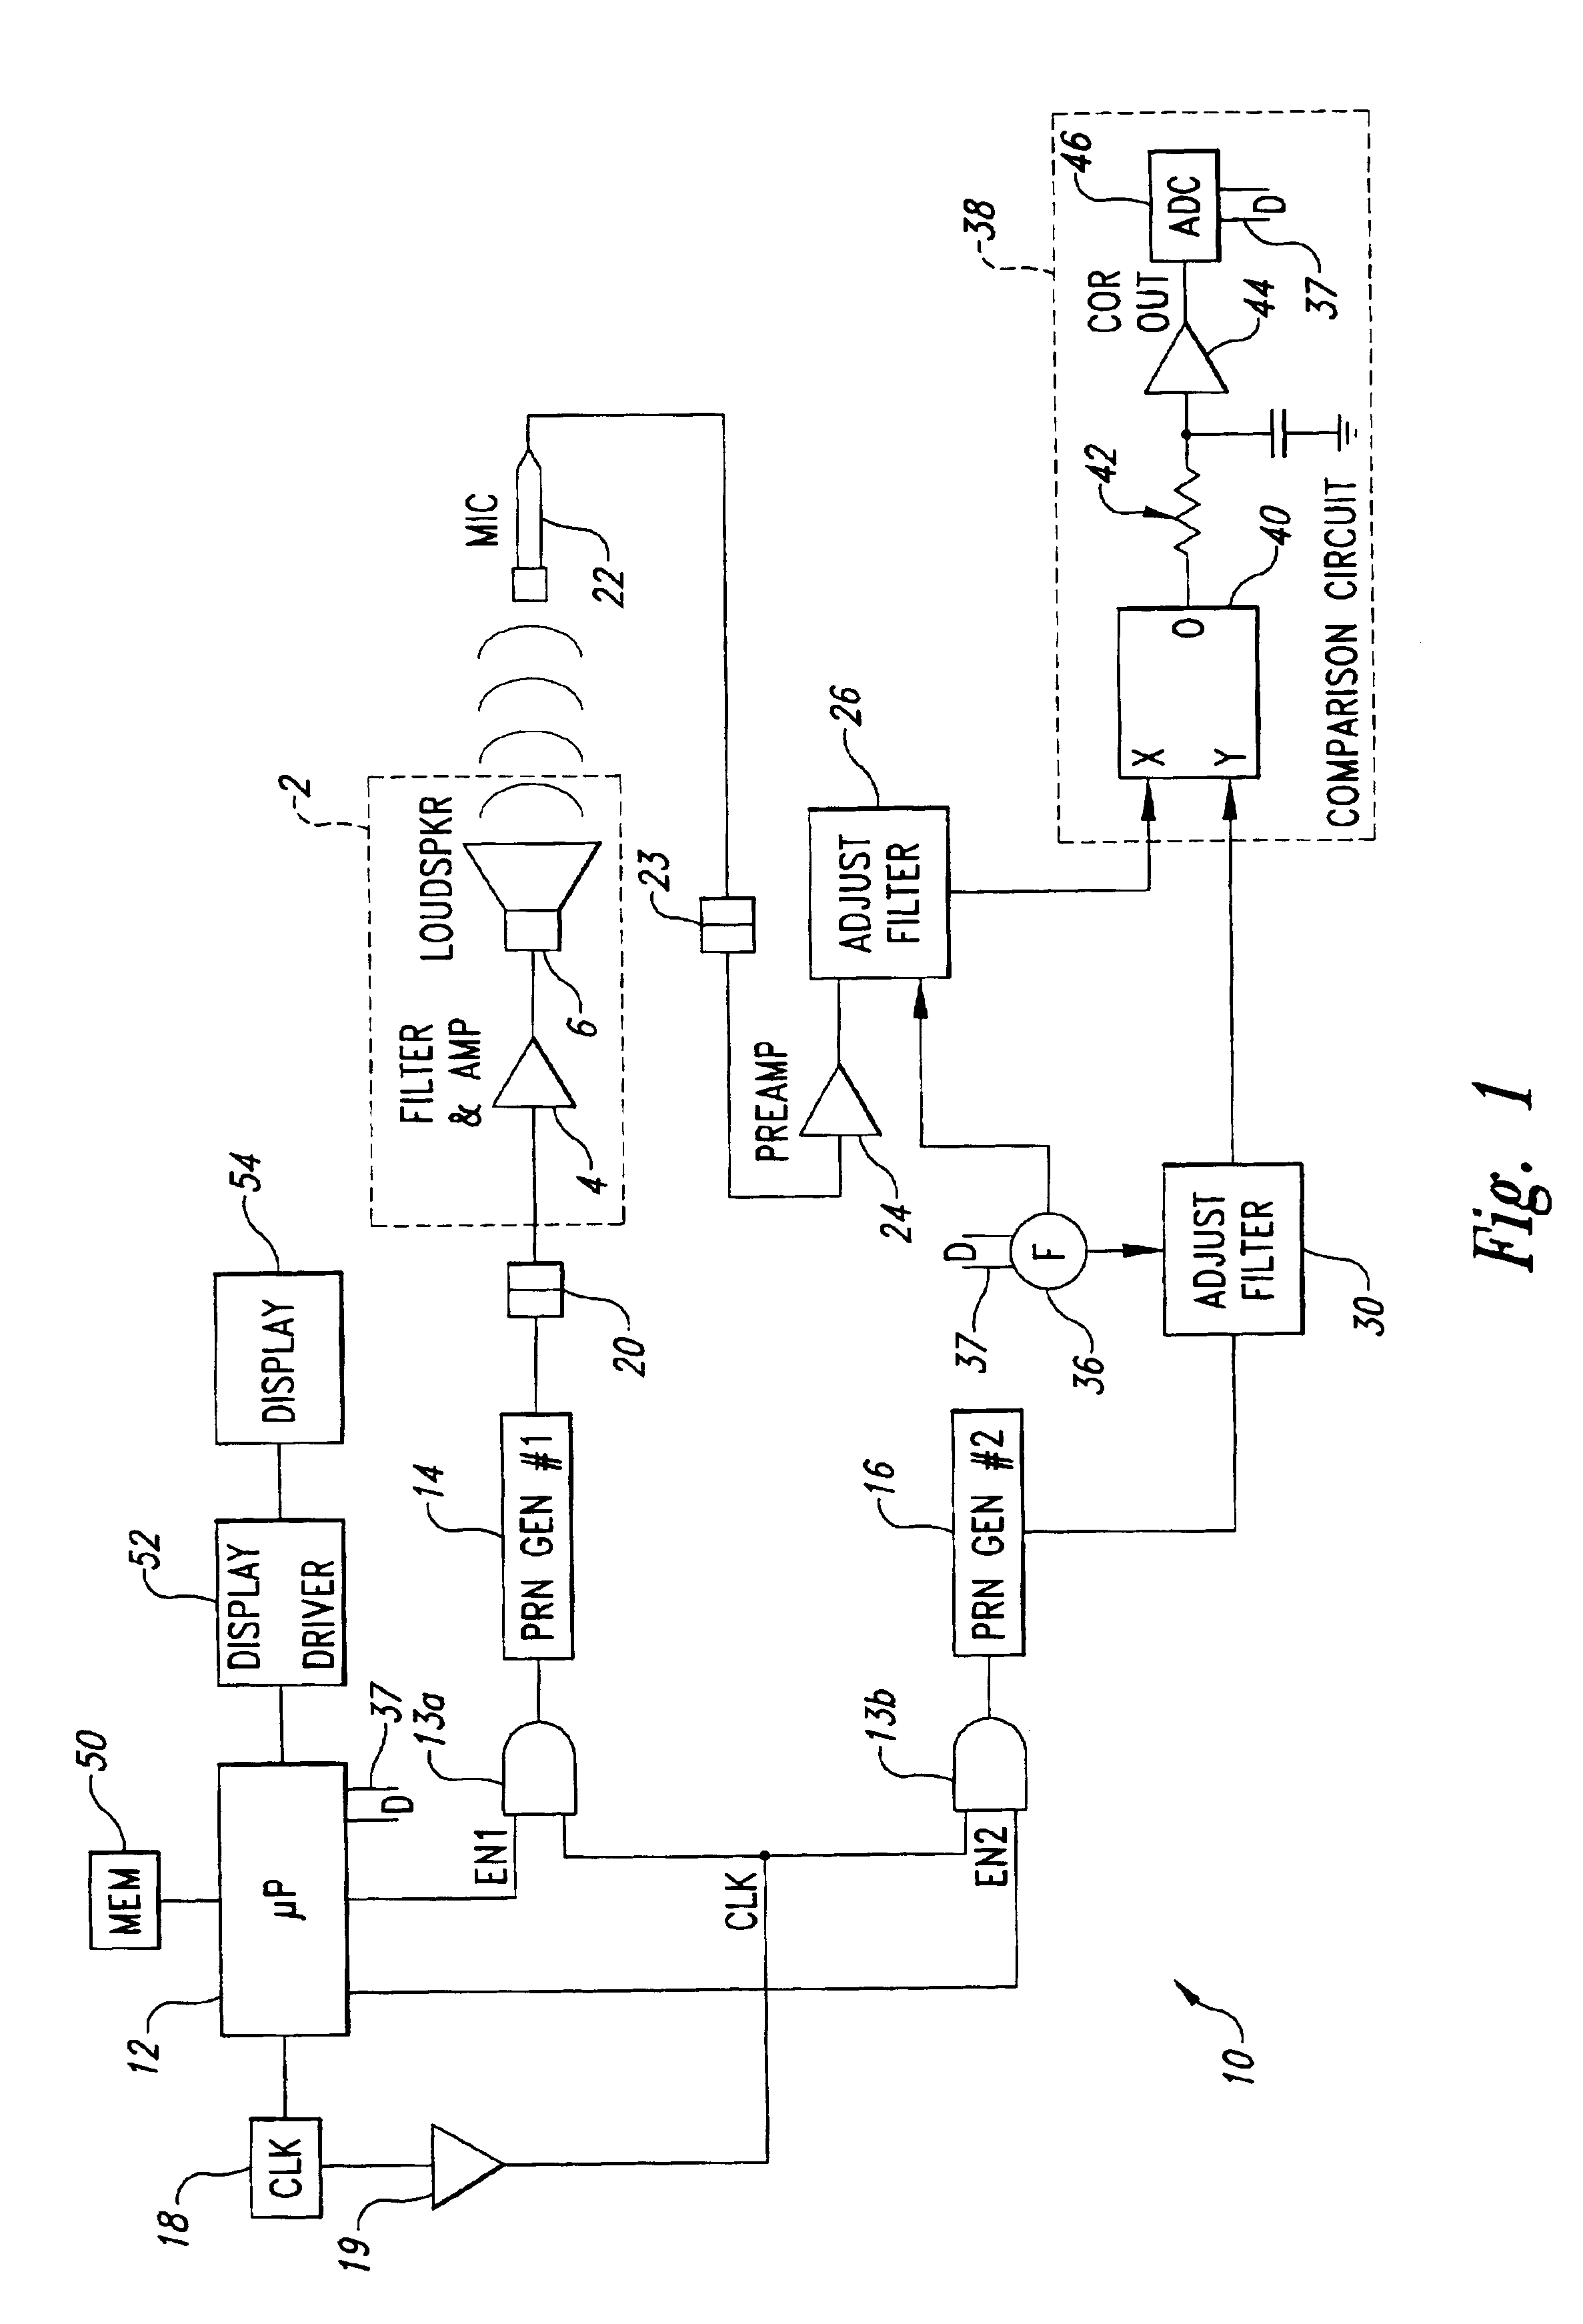 Apparatus and method for analyzing an electro-acoustic system